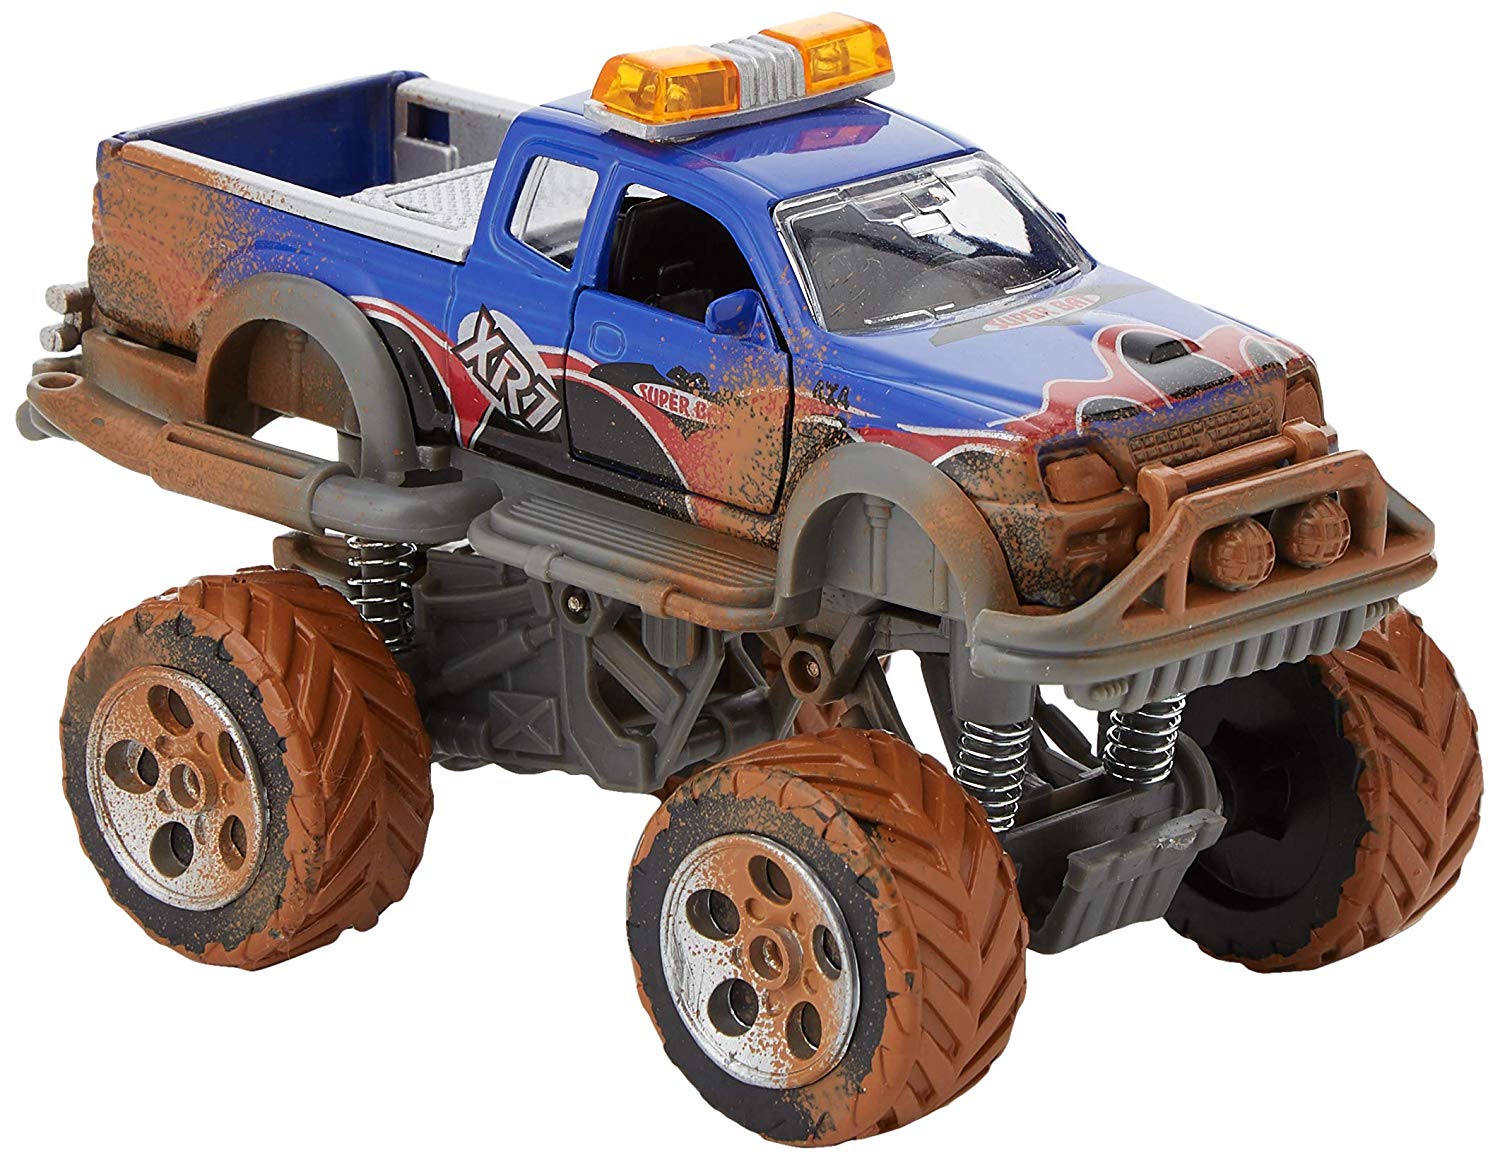 Dickie Toys Eat My Dust Rally 203742010 Monster Trucks Toy 15 Cm Pack Of 3 